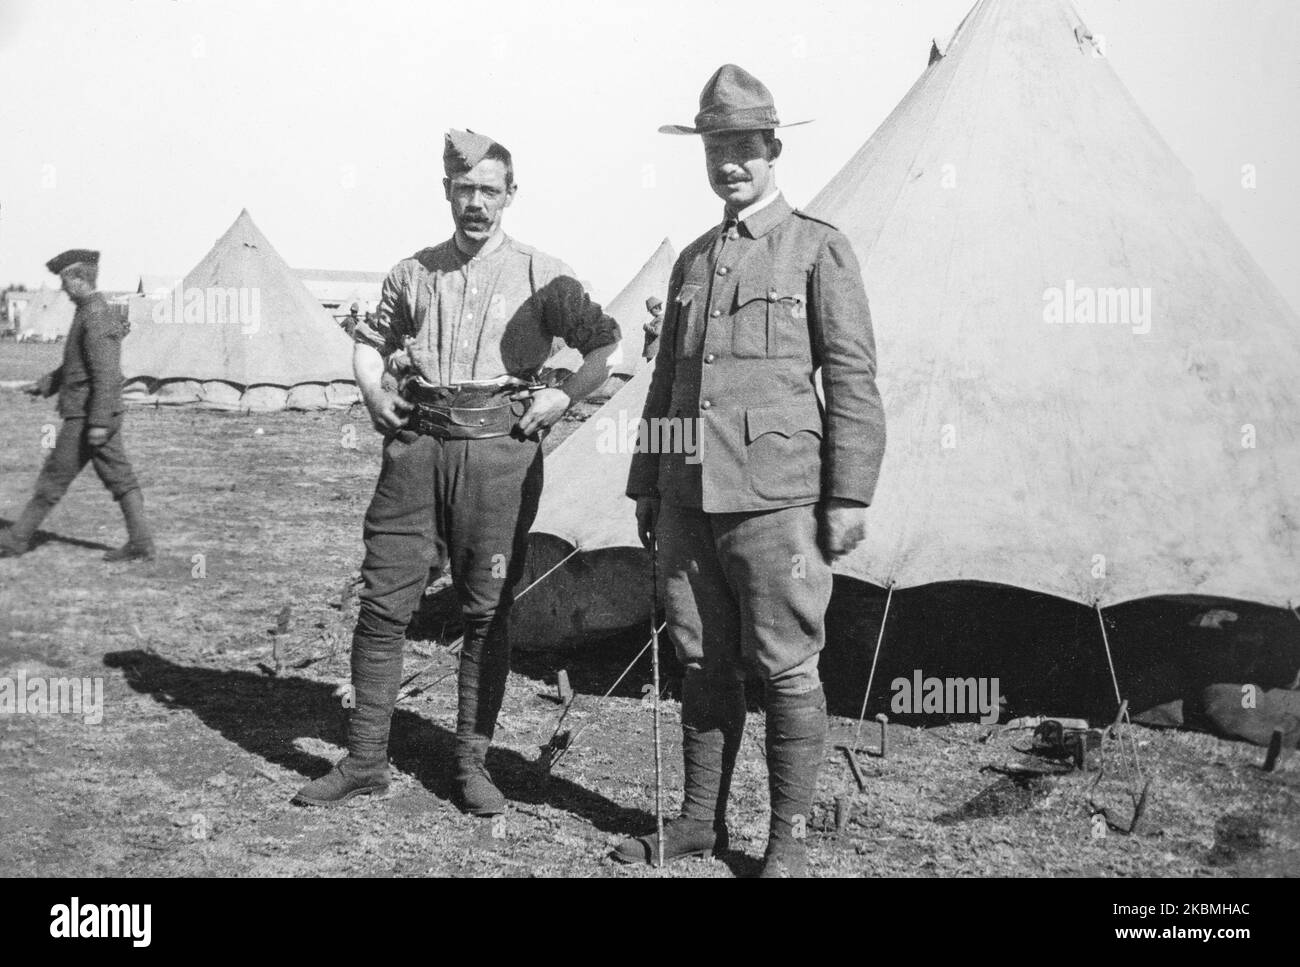 Soldiers of the British Commonwealth outside their tent in South Africa during The Boer War. Stock Photo